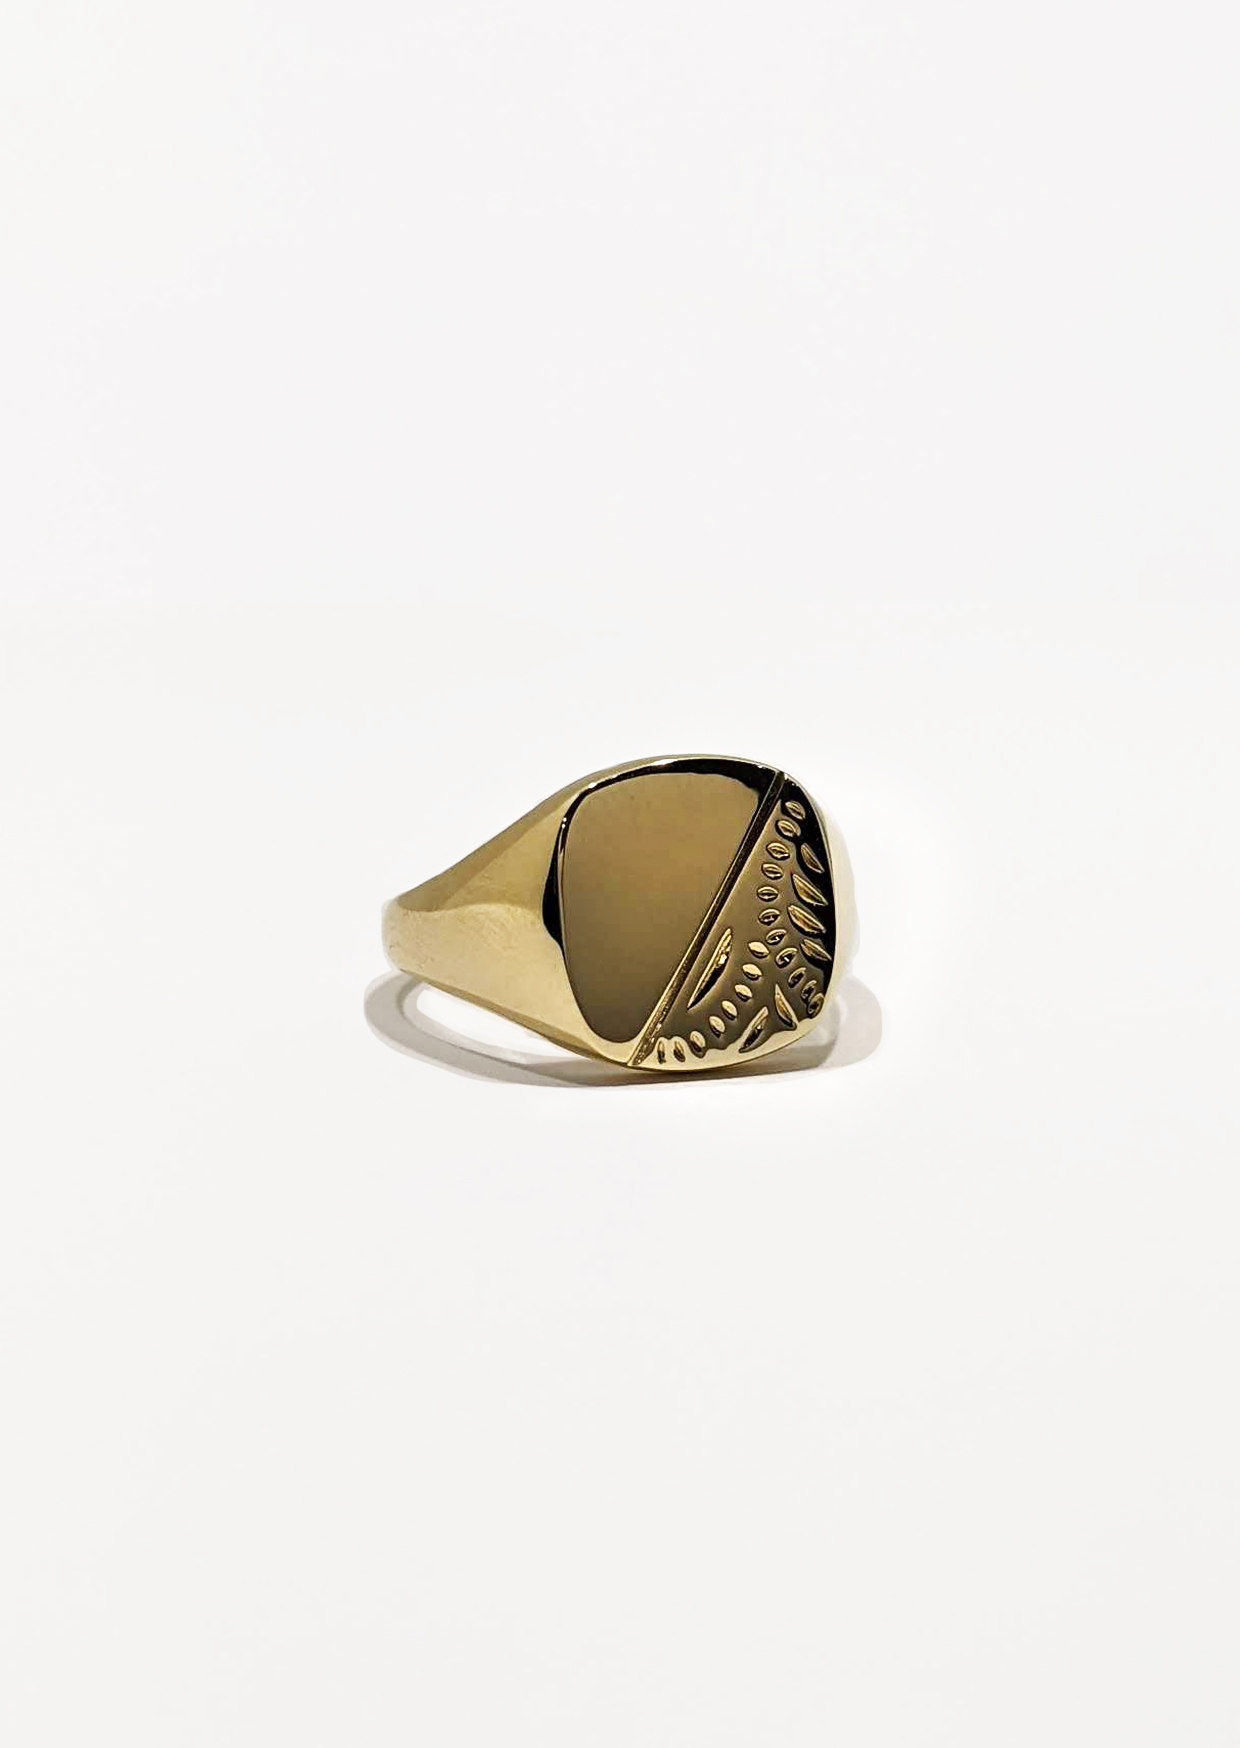 Cushion Engraved Signet Ring 9ct Yellow Gold